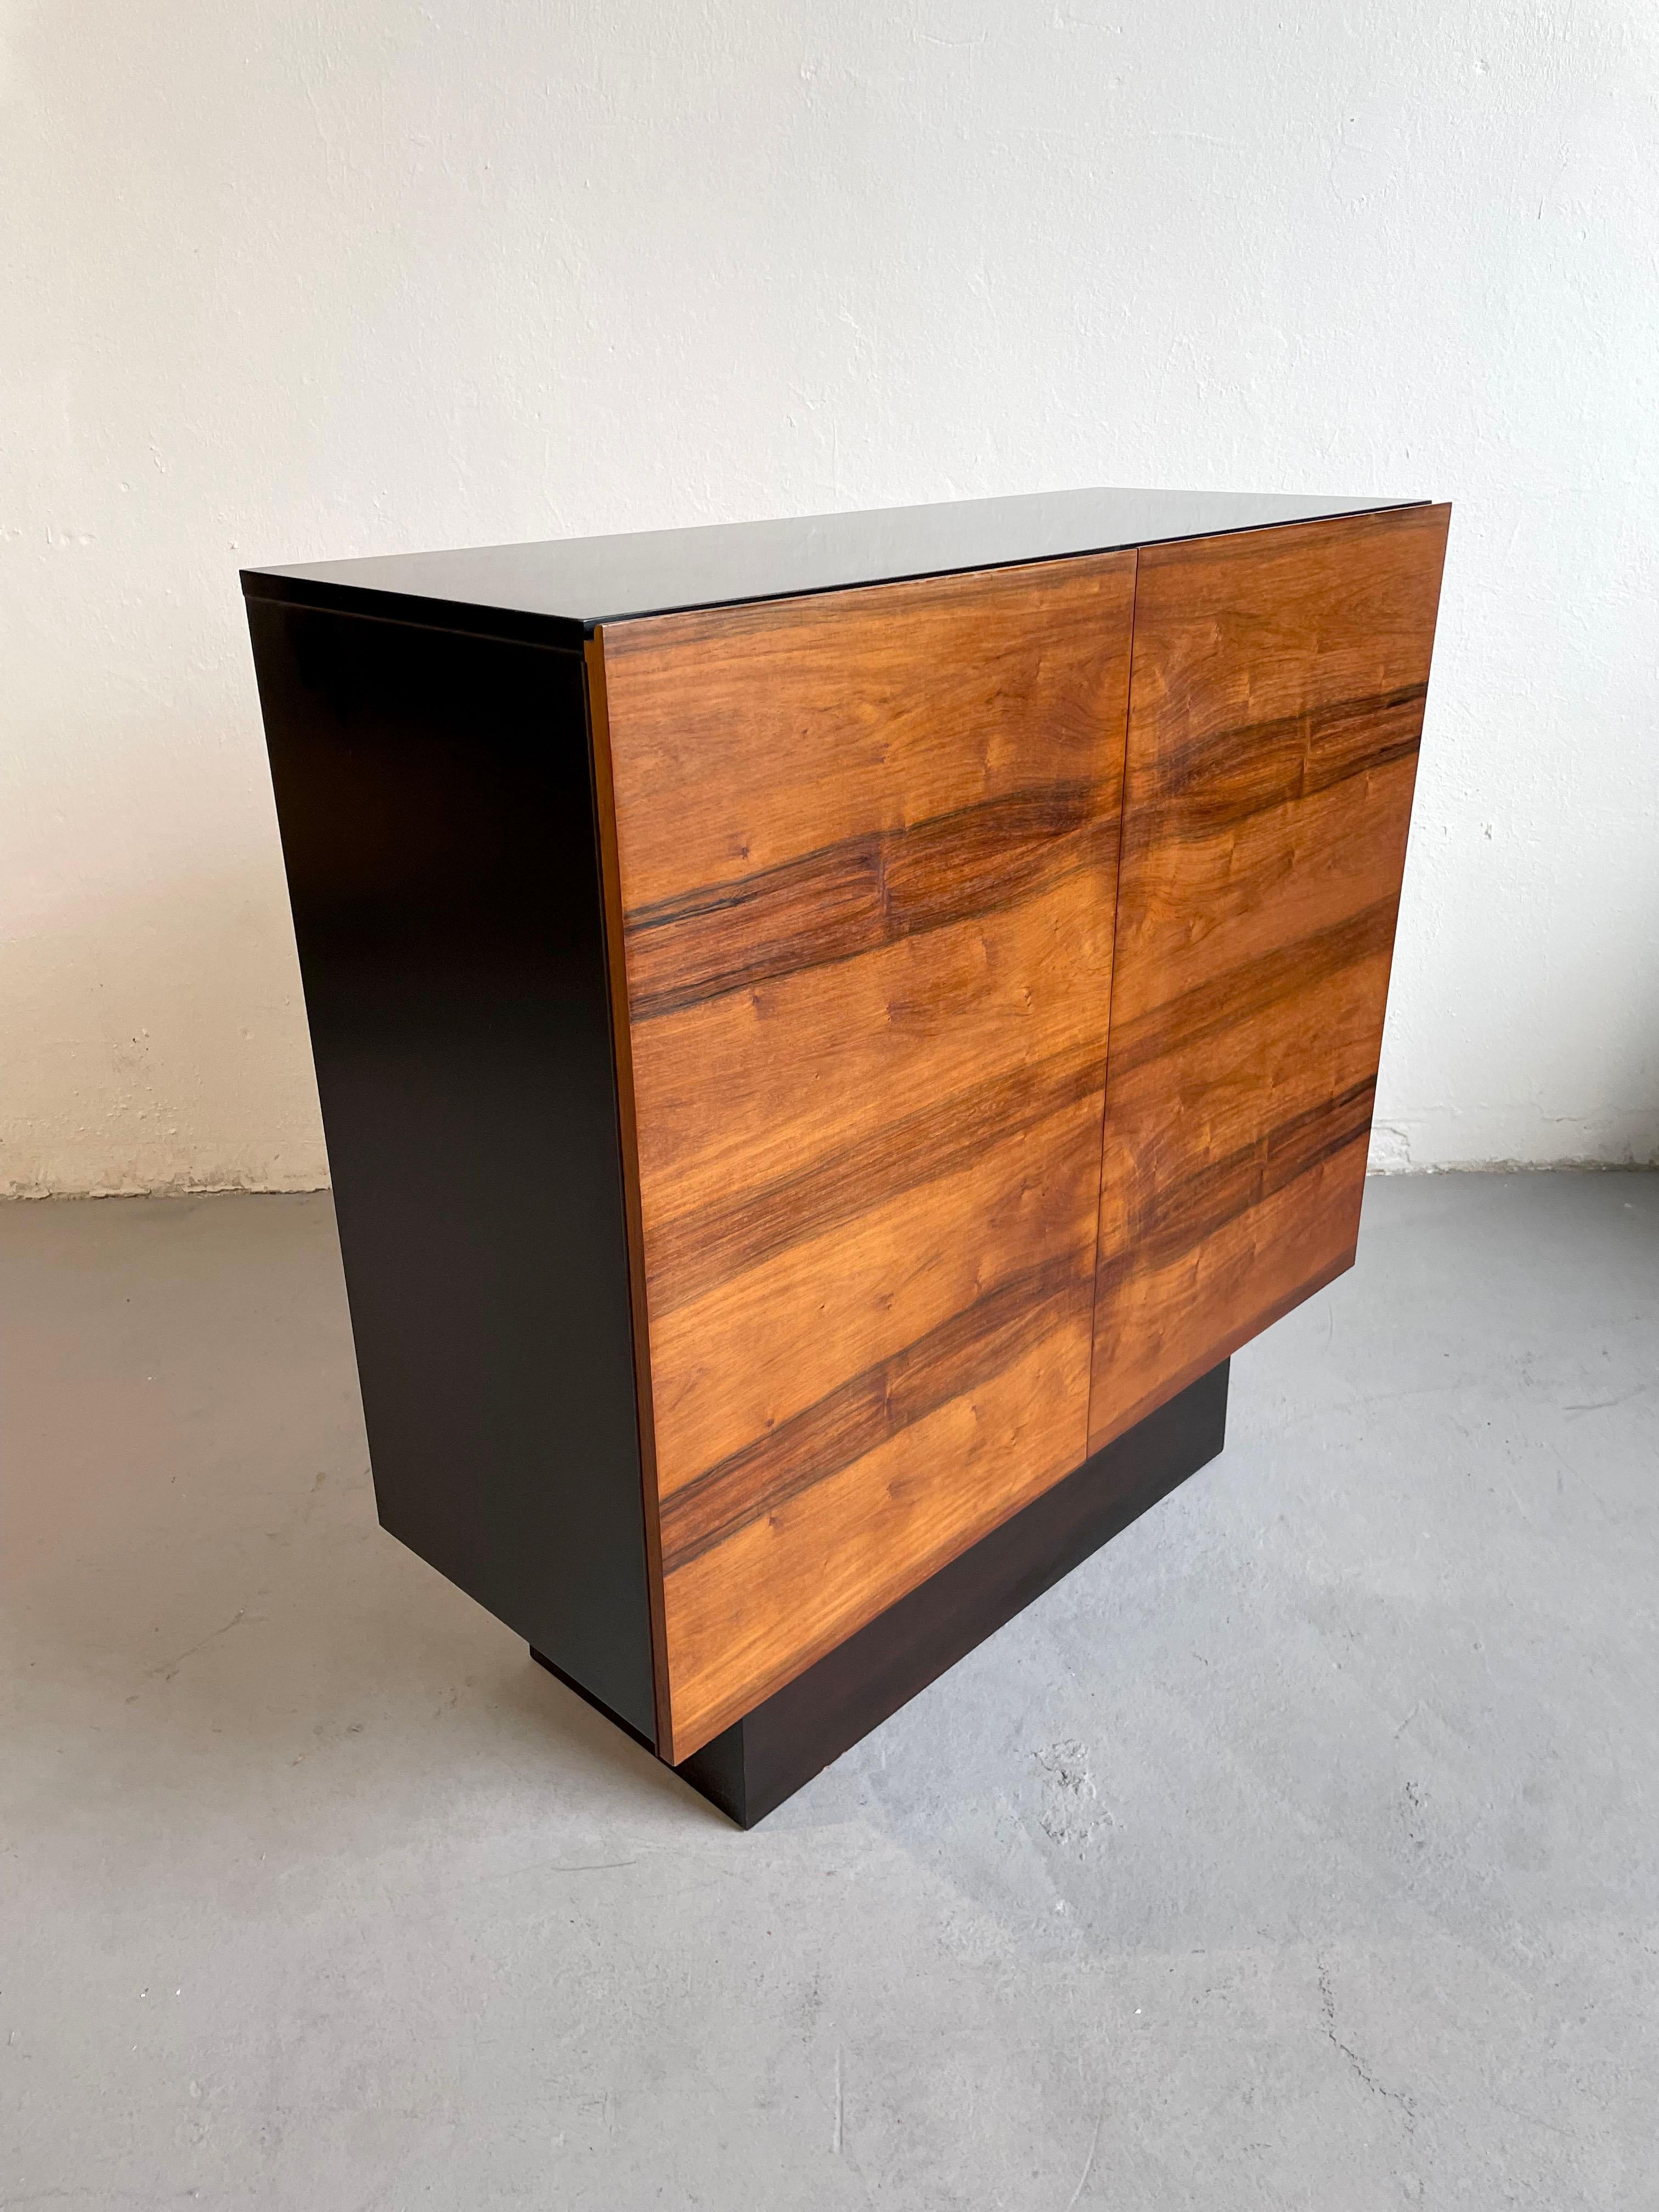 Midcentury Rosewood Sideboard Buffet Cabinet, Minimalist Design, 1970s For Sale 4